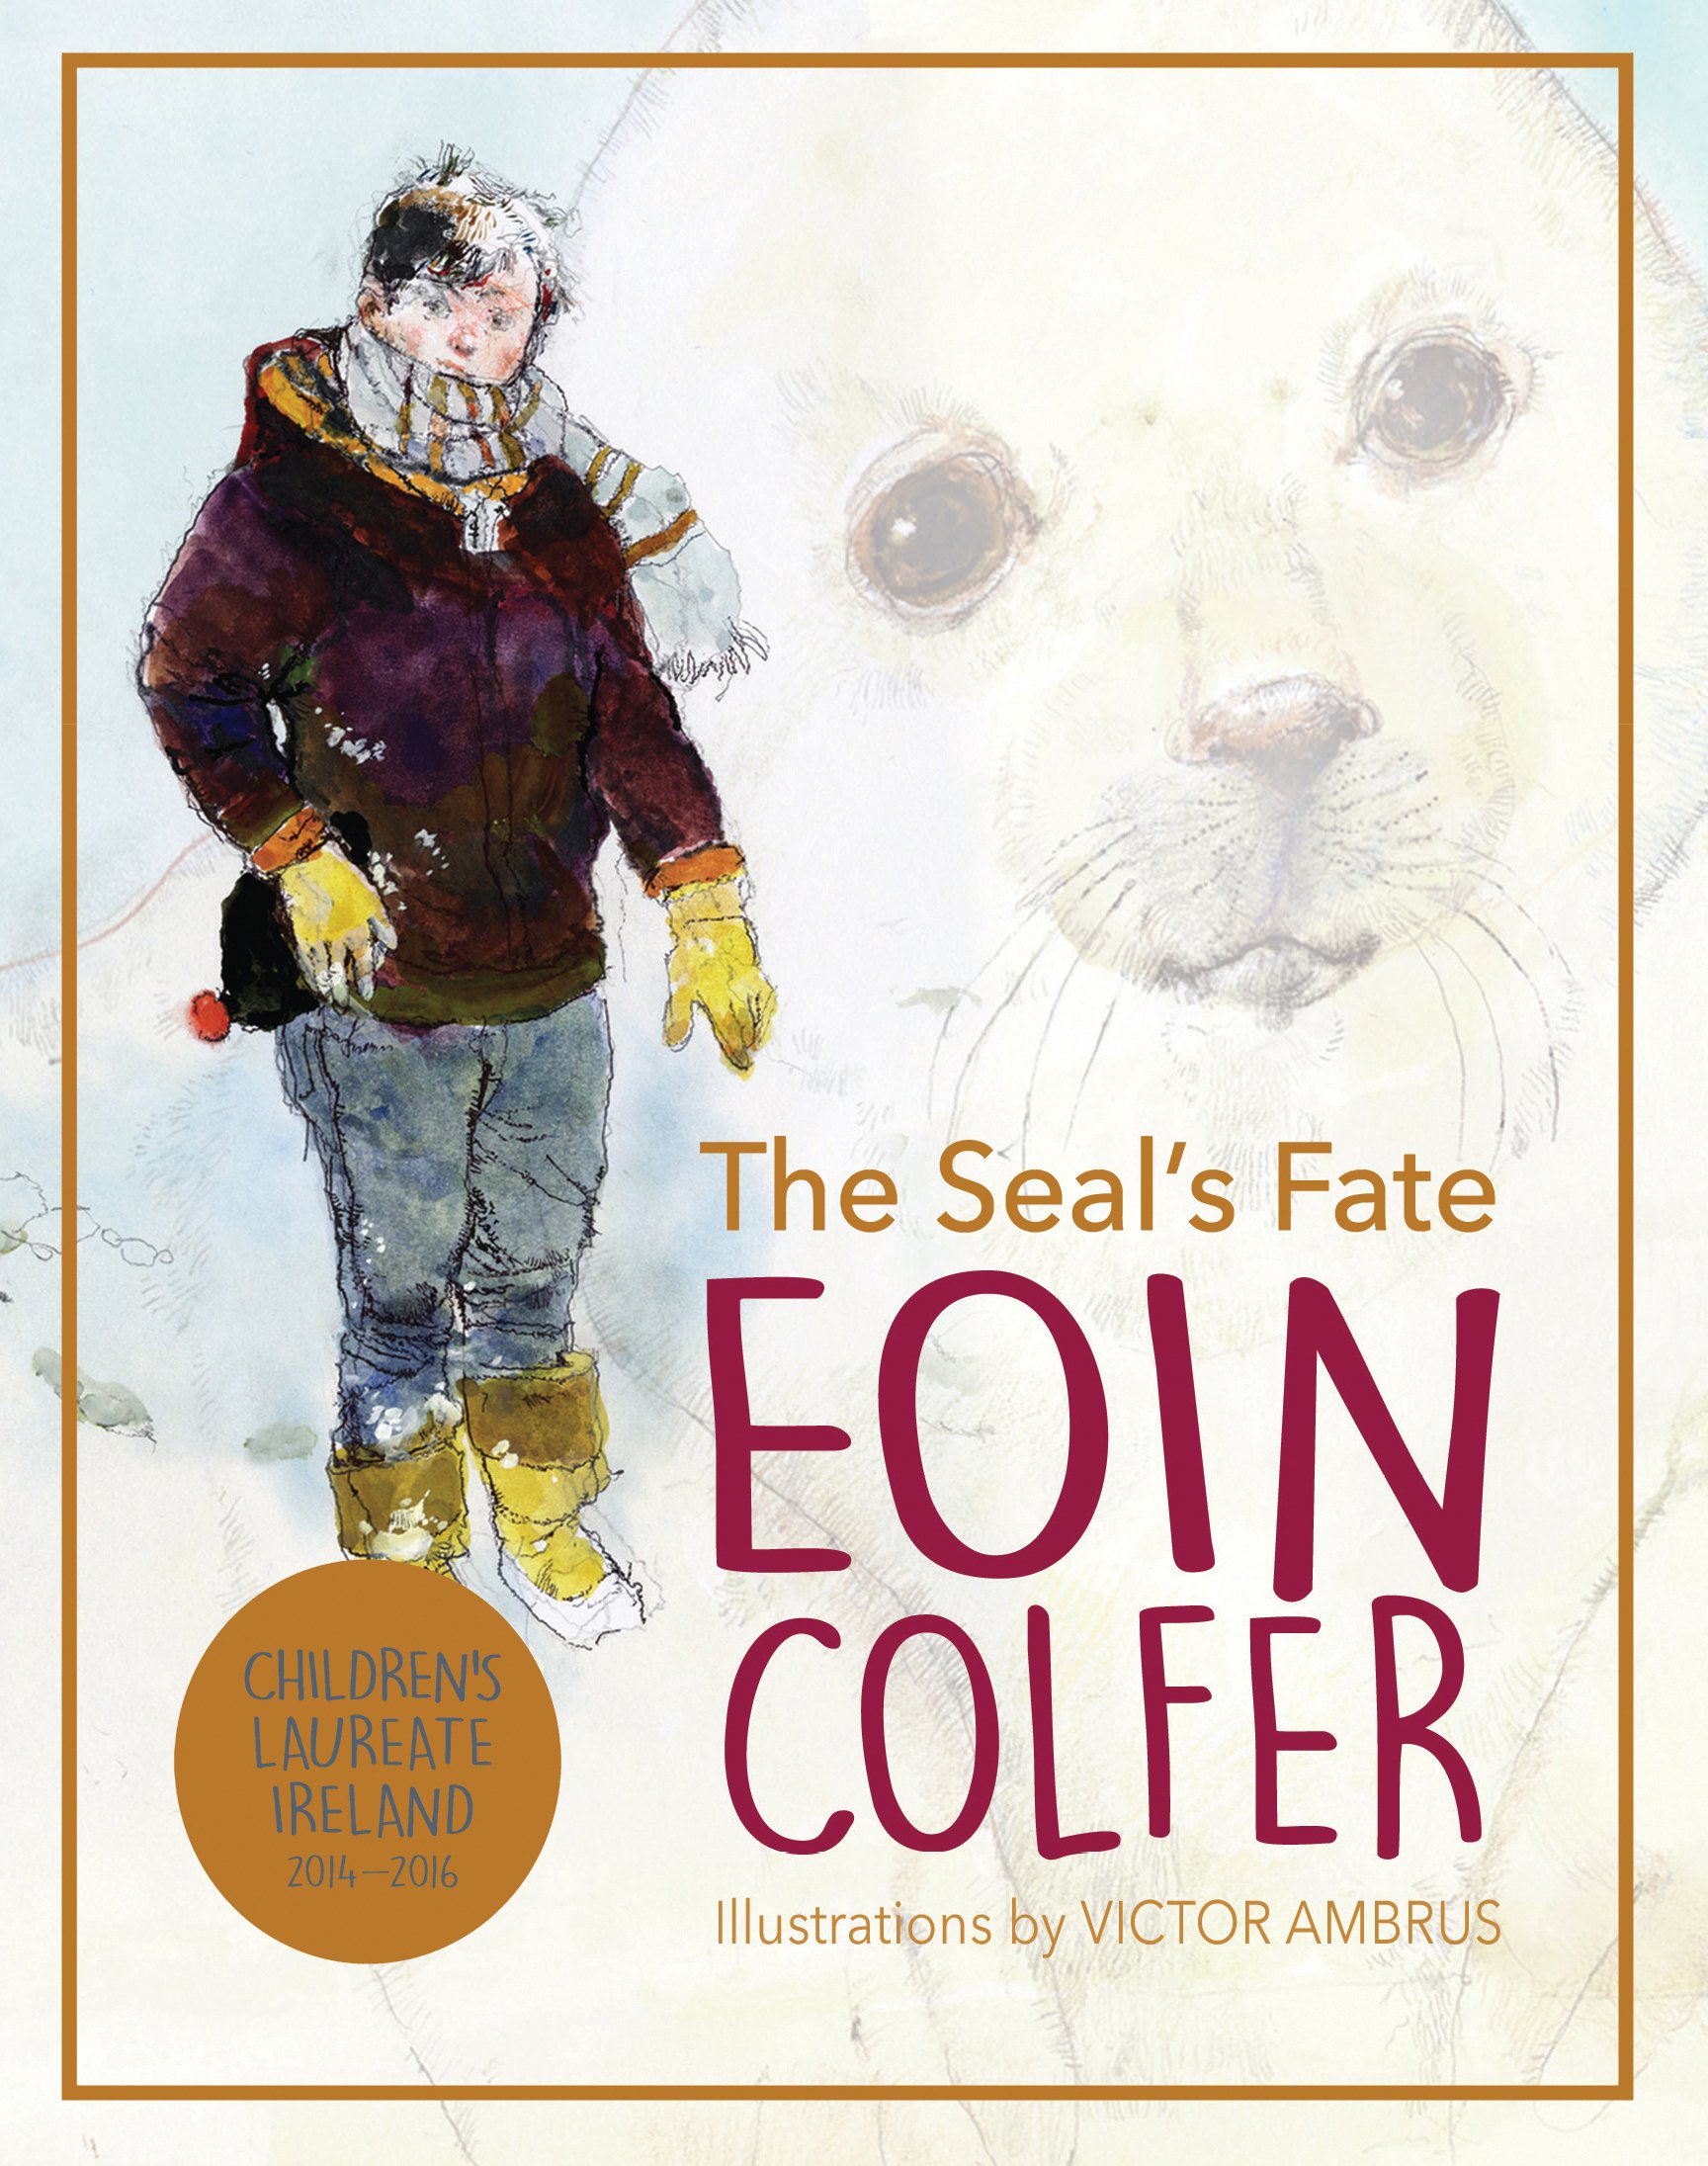 The Seal's Fate by Eoin Colfer